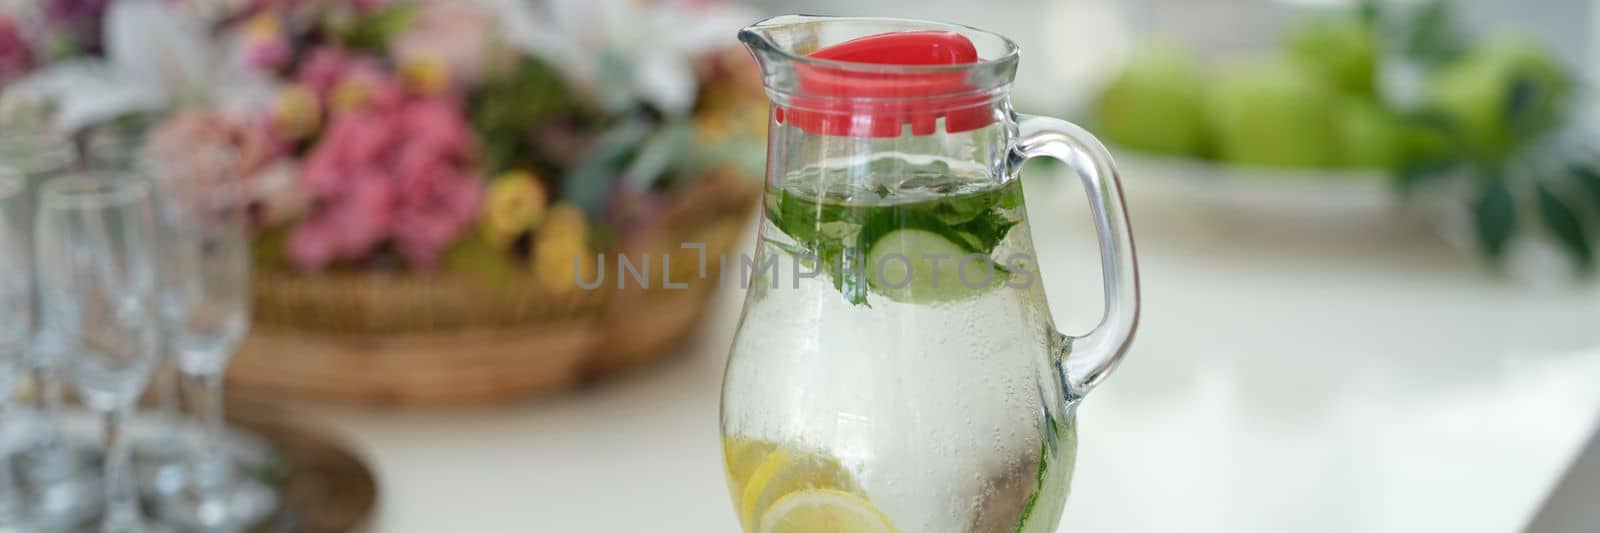 Infused detox water with cucumber, lemon and mint in jug on table by kuprevich